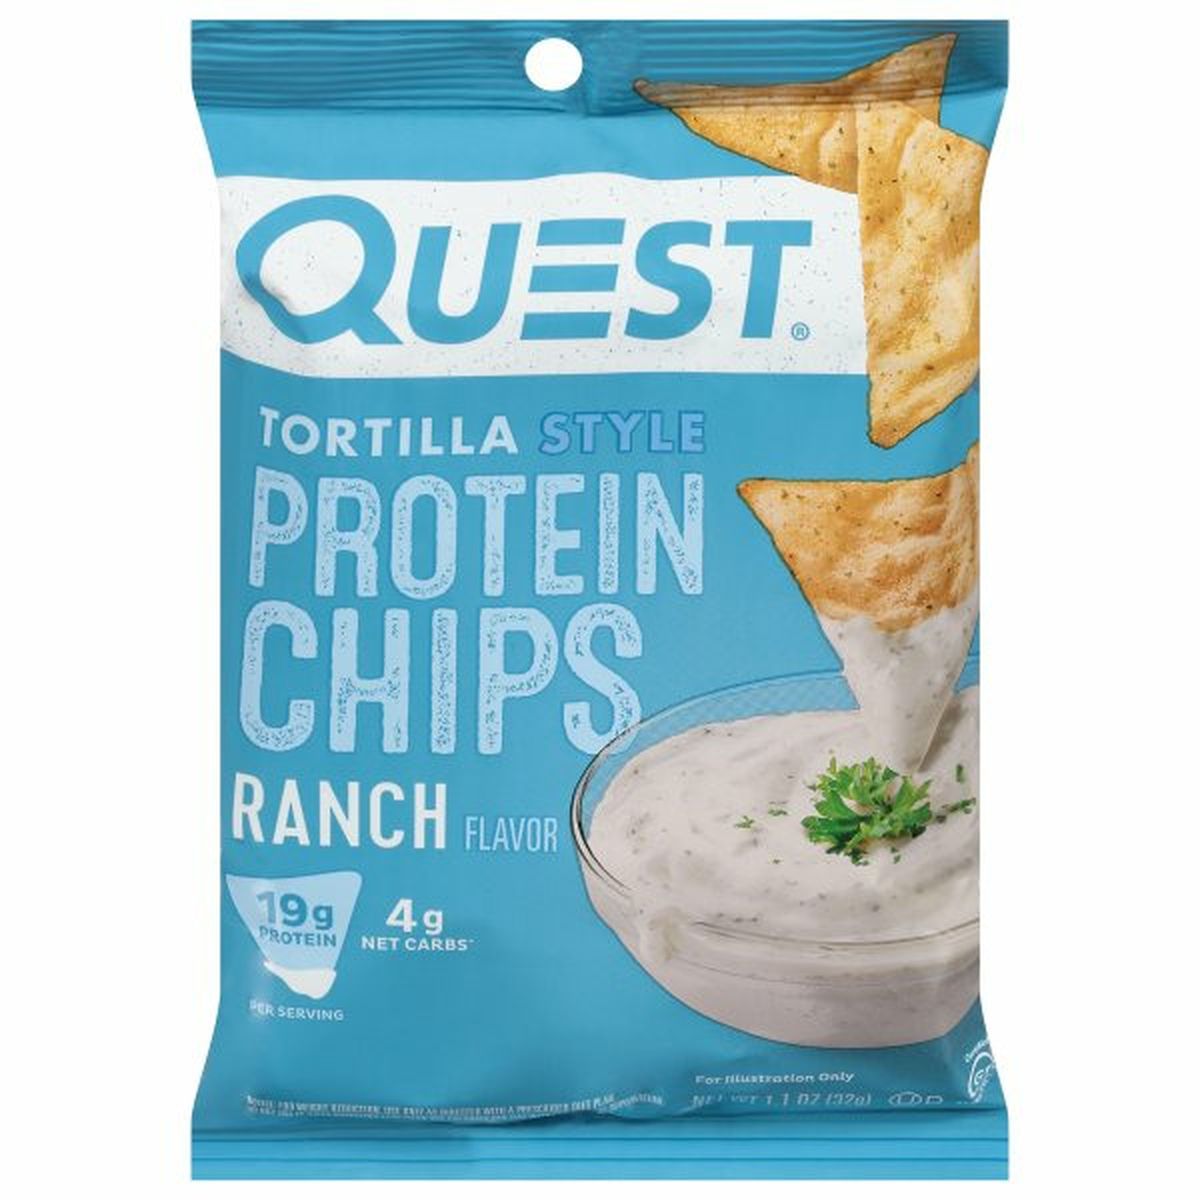 Calories in Quest Protein Chips, Ranch Flavor, Tortilla Style